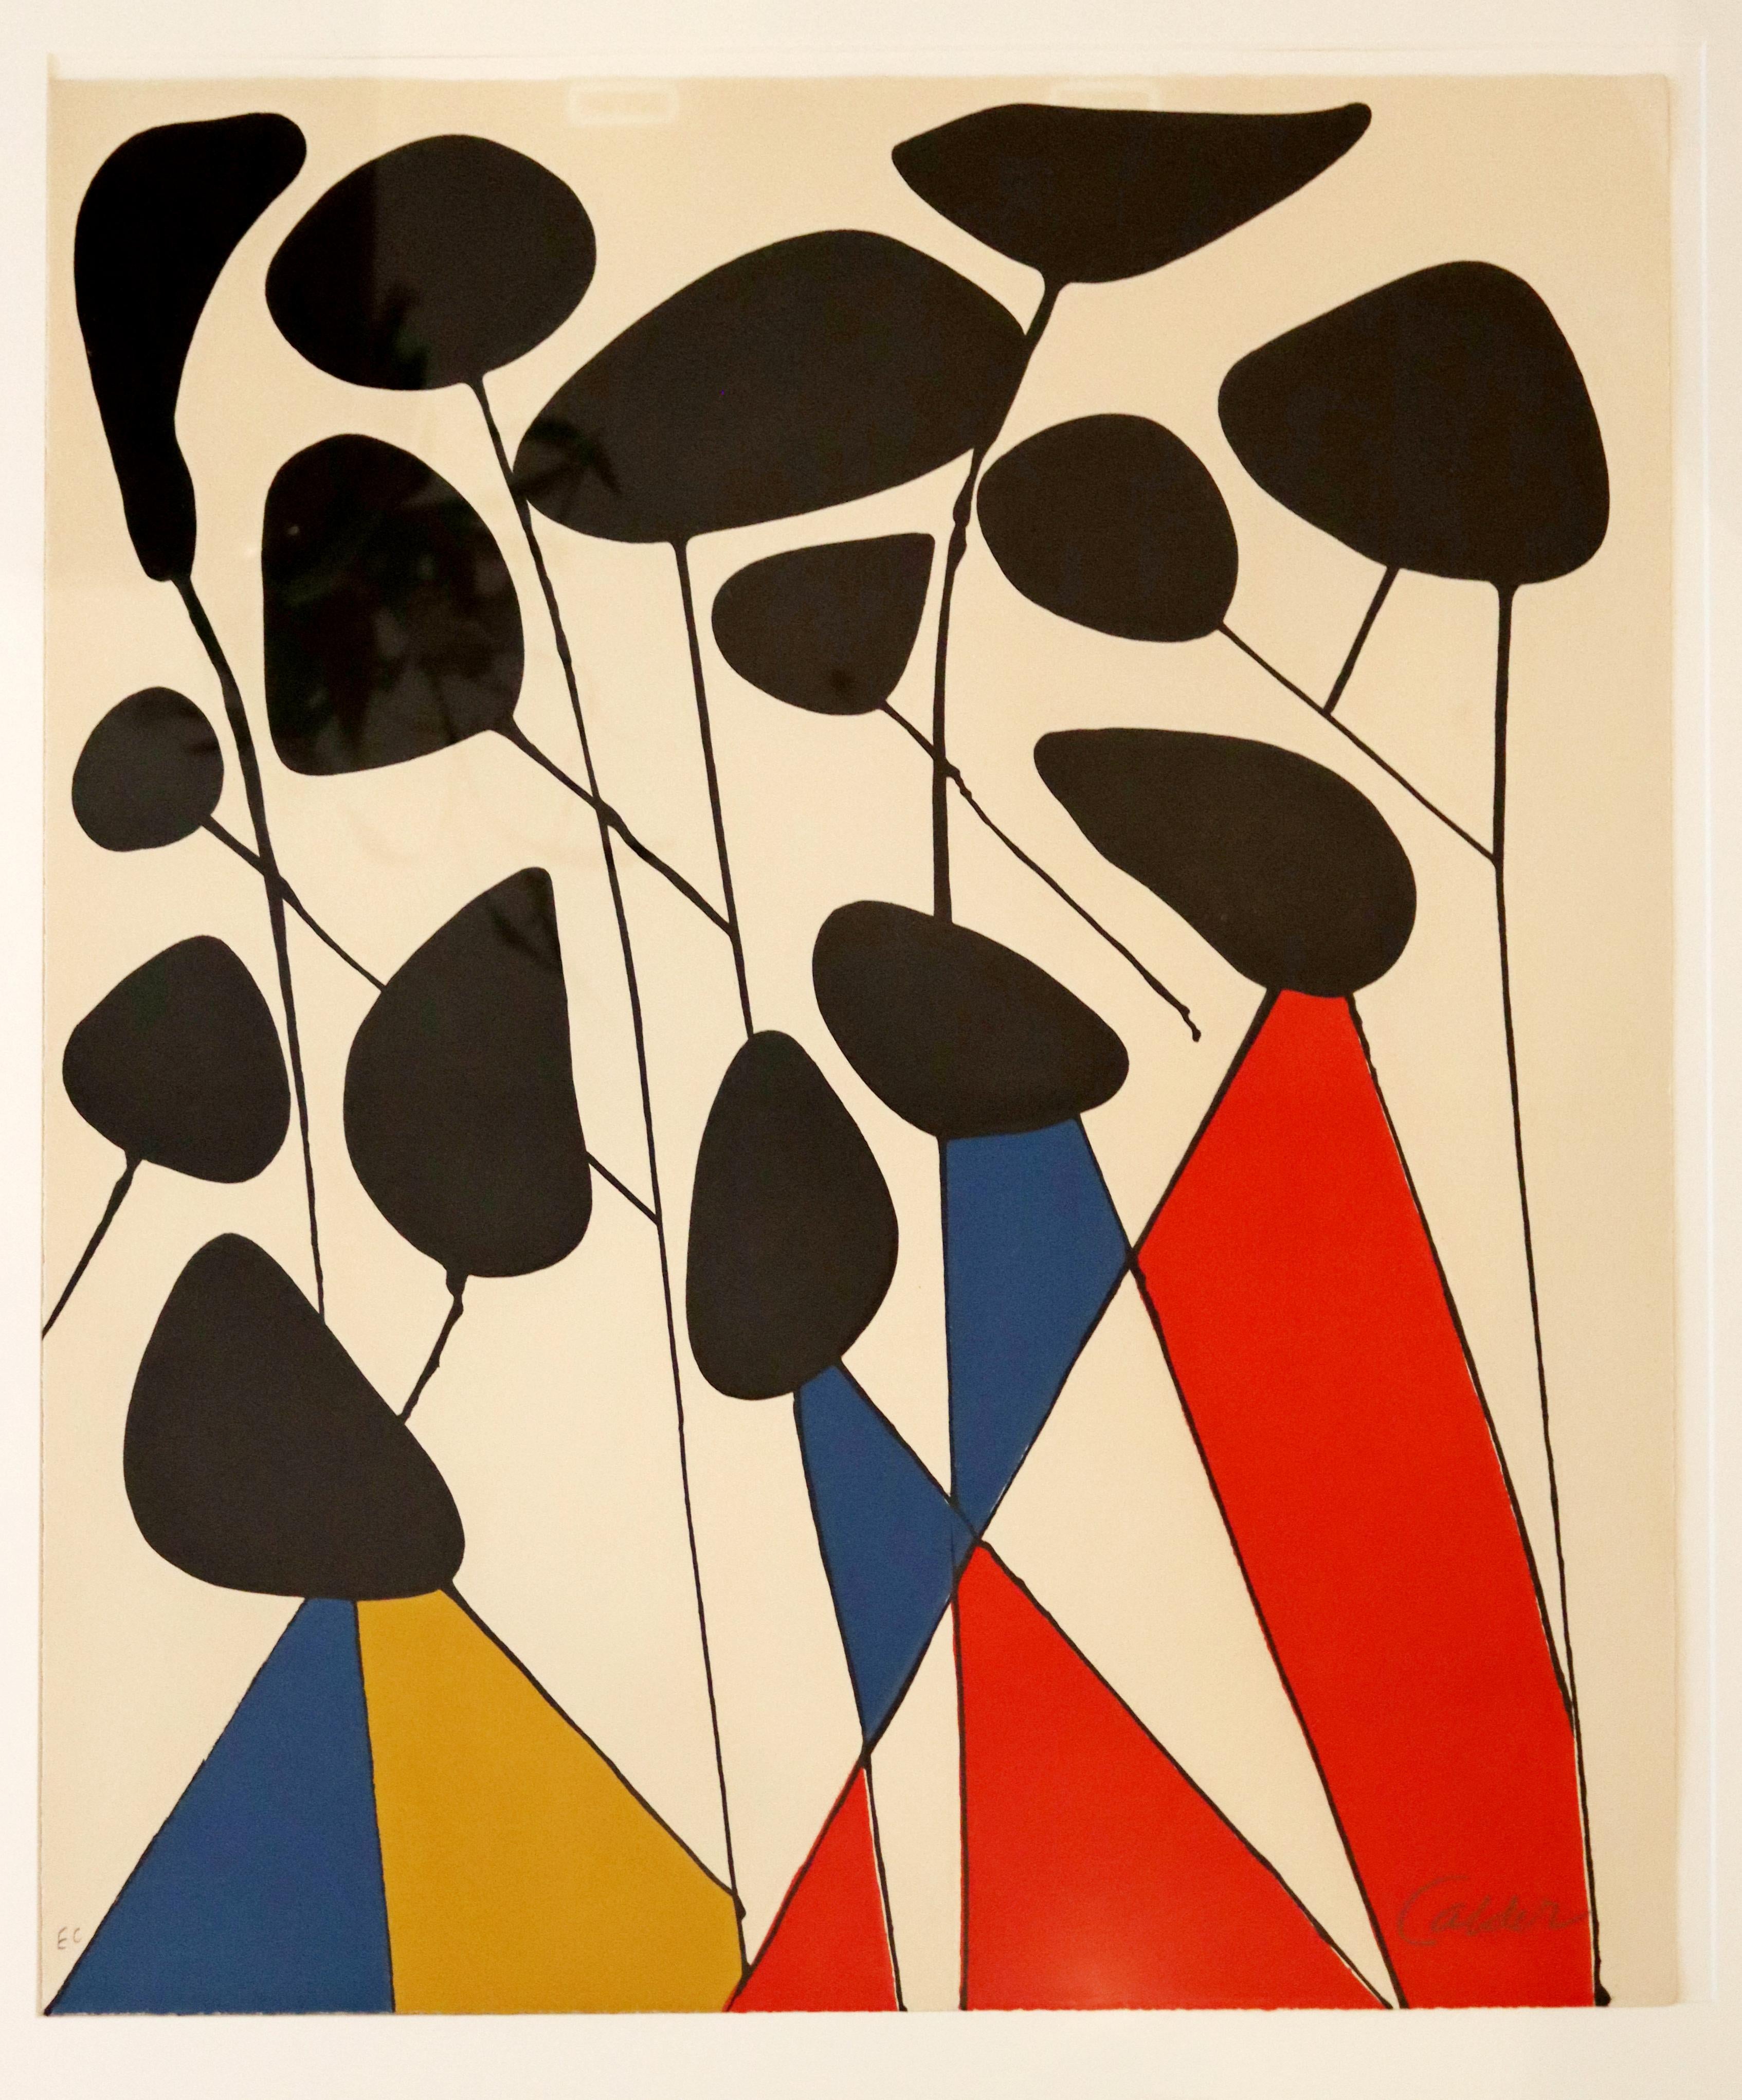 For your consideration is a wonderful, framed, E.C. lithograph, pencil signed by Alexander Calder. Series Magie Eolienne. In excellent condition, except for two marks of tape damage at the top. Matting will cover it. The dimensions of the frame are